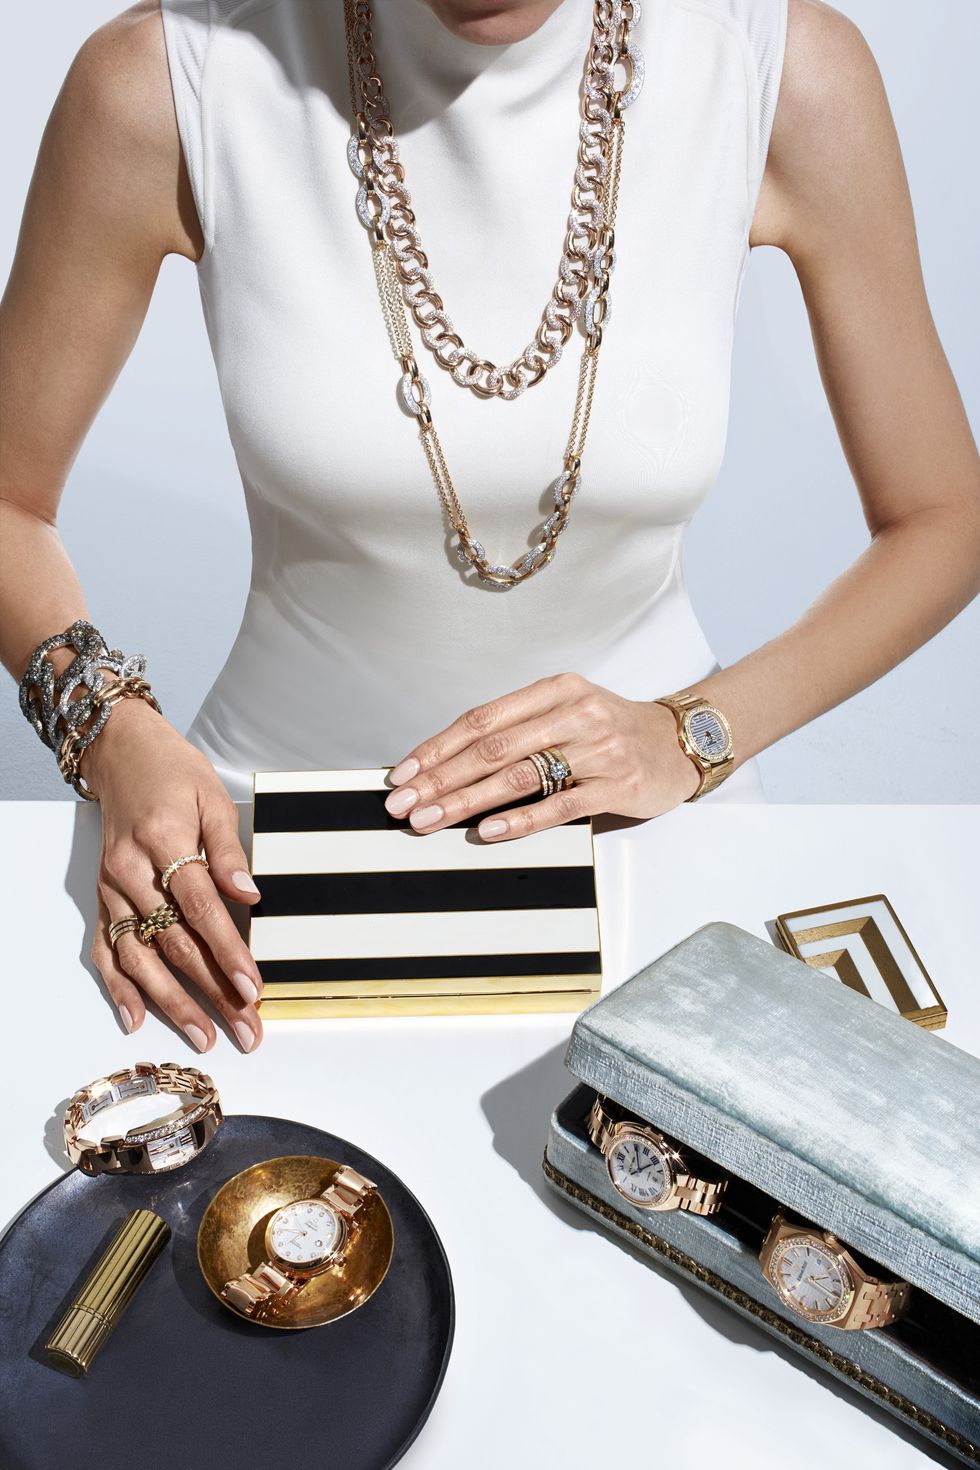 Fine Jewelry and Watches - Trends in Luxury Jewelry and Watches